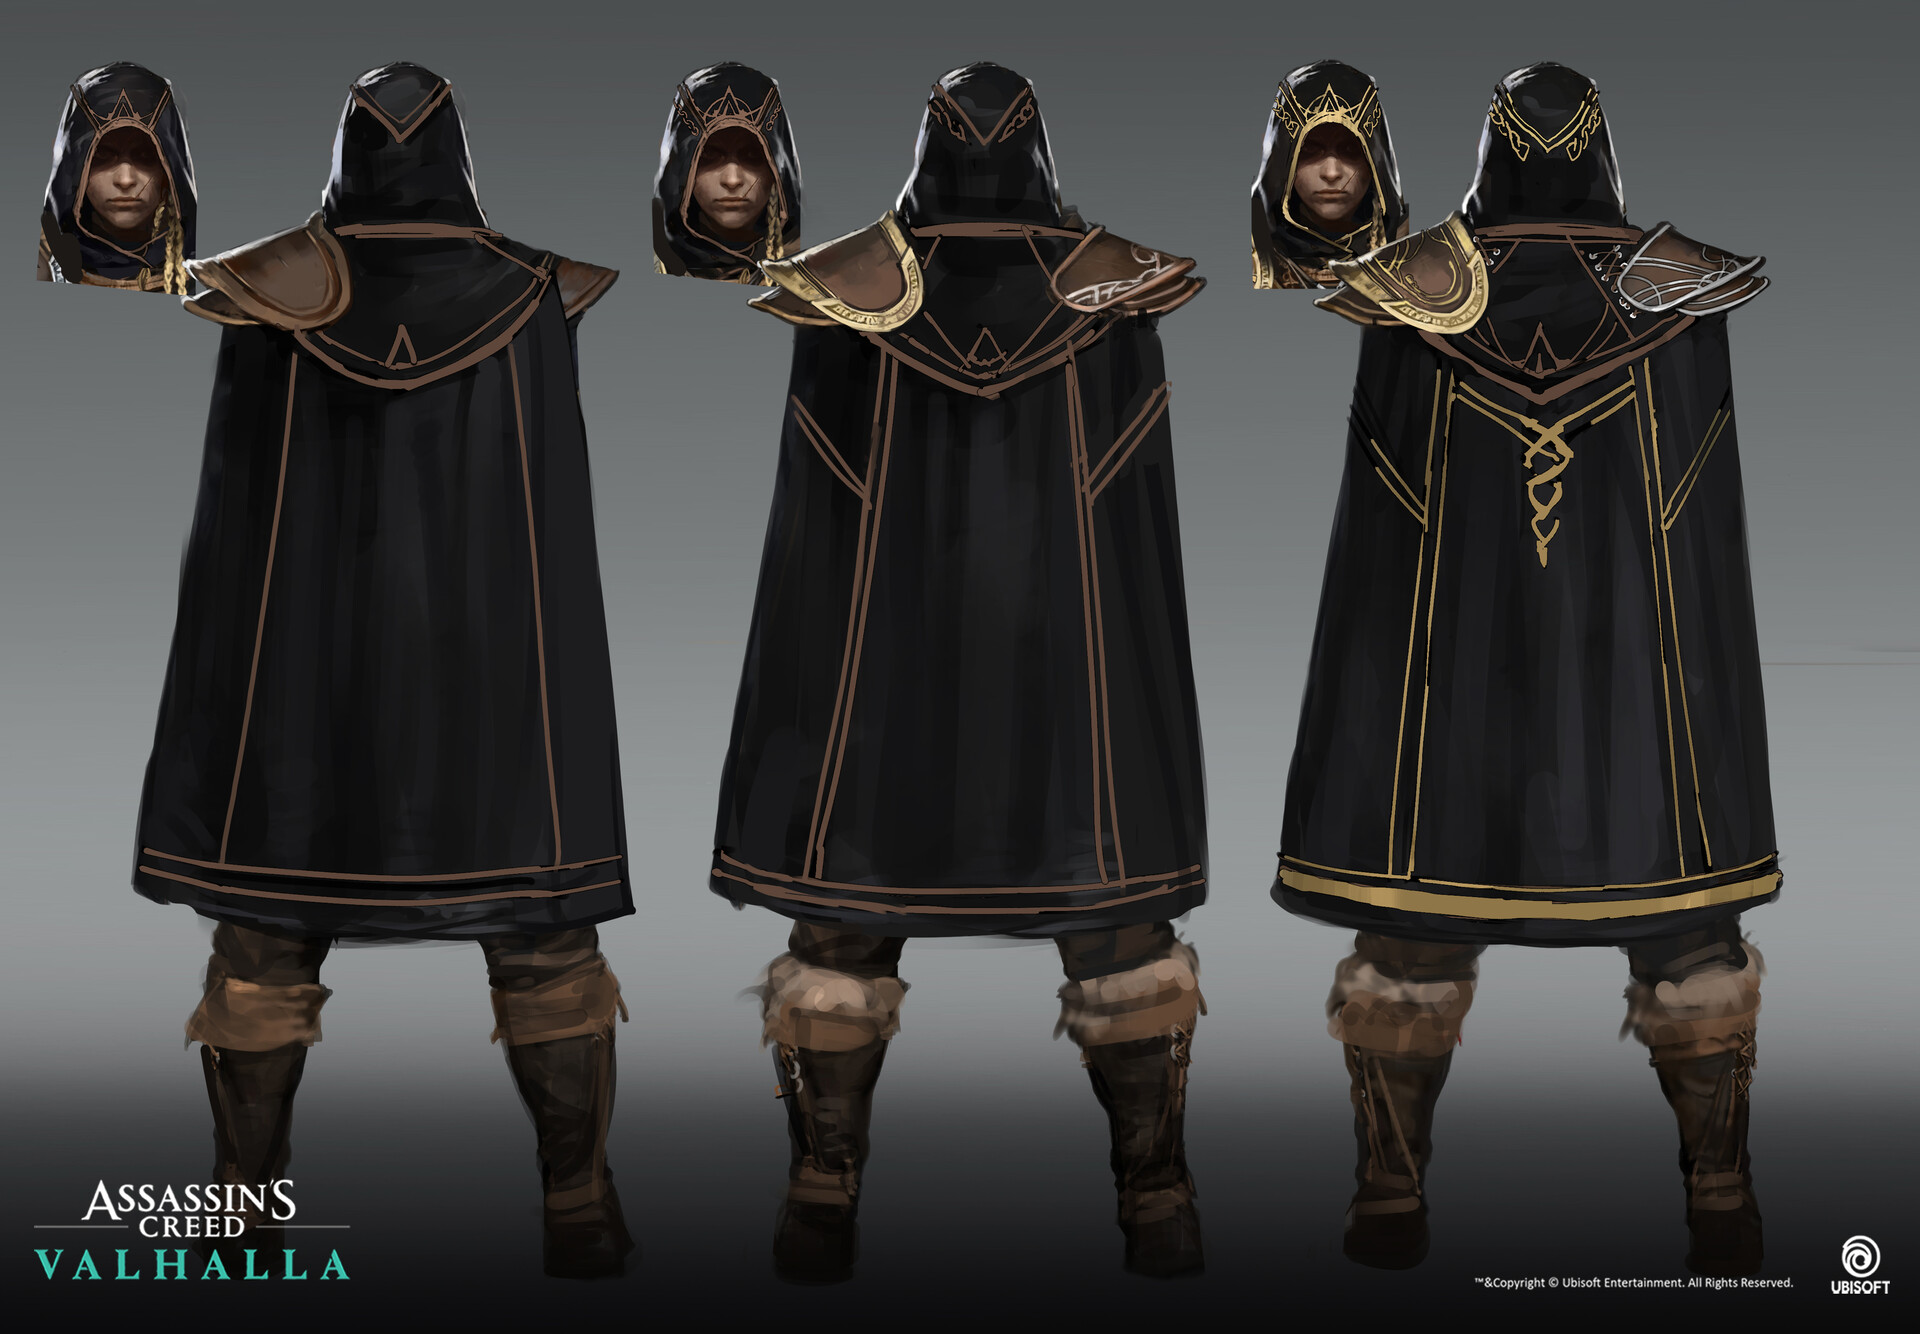 Assassin's Creed Valhalla - Eivor assassin outfit 1.